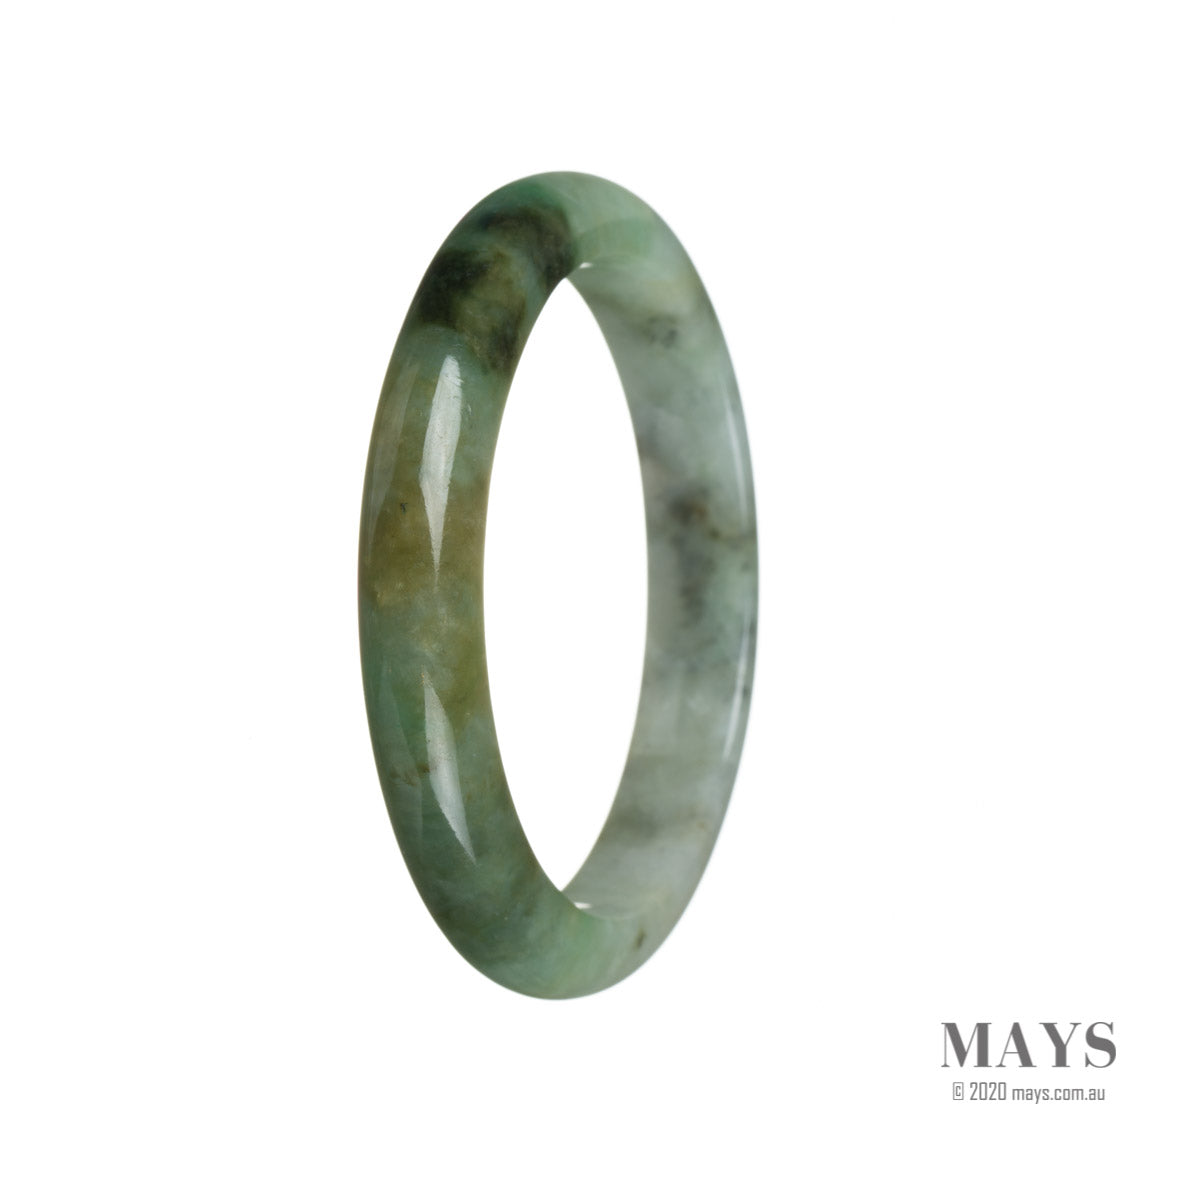 Close-up image of a vibrant green Burma Jade bracelet with a unique pattern, in a semi-round shape. The bracelet is made of real Type A Jade and measures 58mm in size. A stunning piece of jewelry from MAYS GEMS.